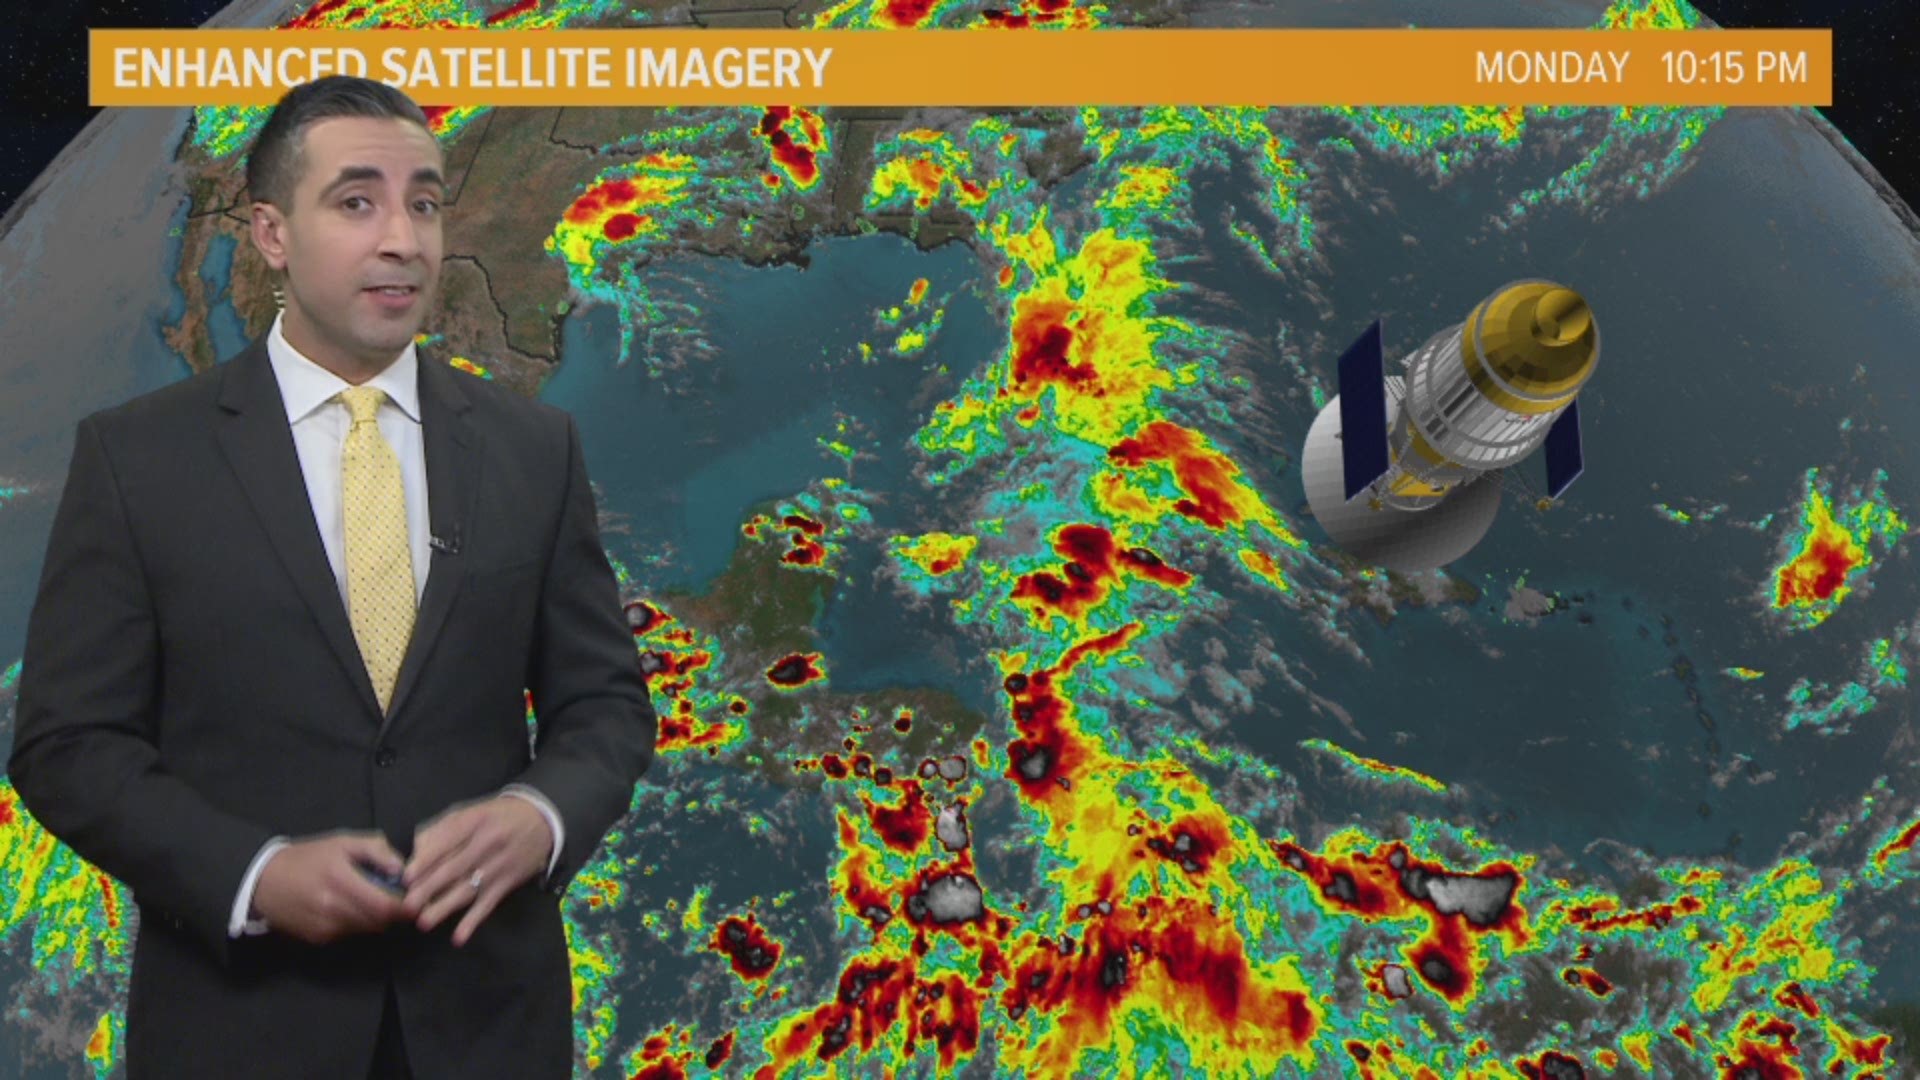 13News Now meteorologist Tim Pandajis takes a look at a storm system brewing in the Gulf of Mexico that could bring rain to Florida and the Southeast in the coming days.